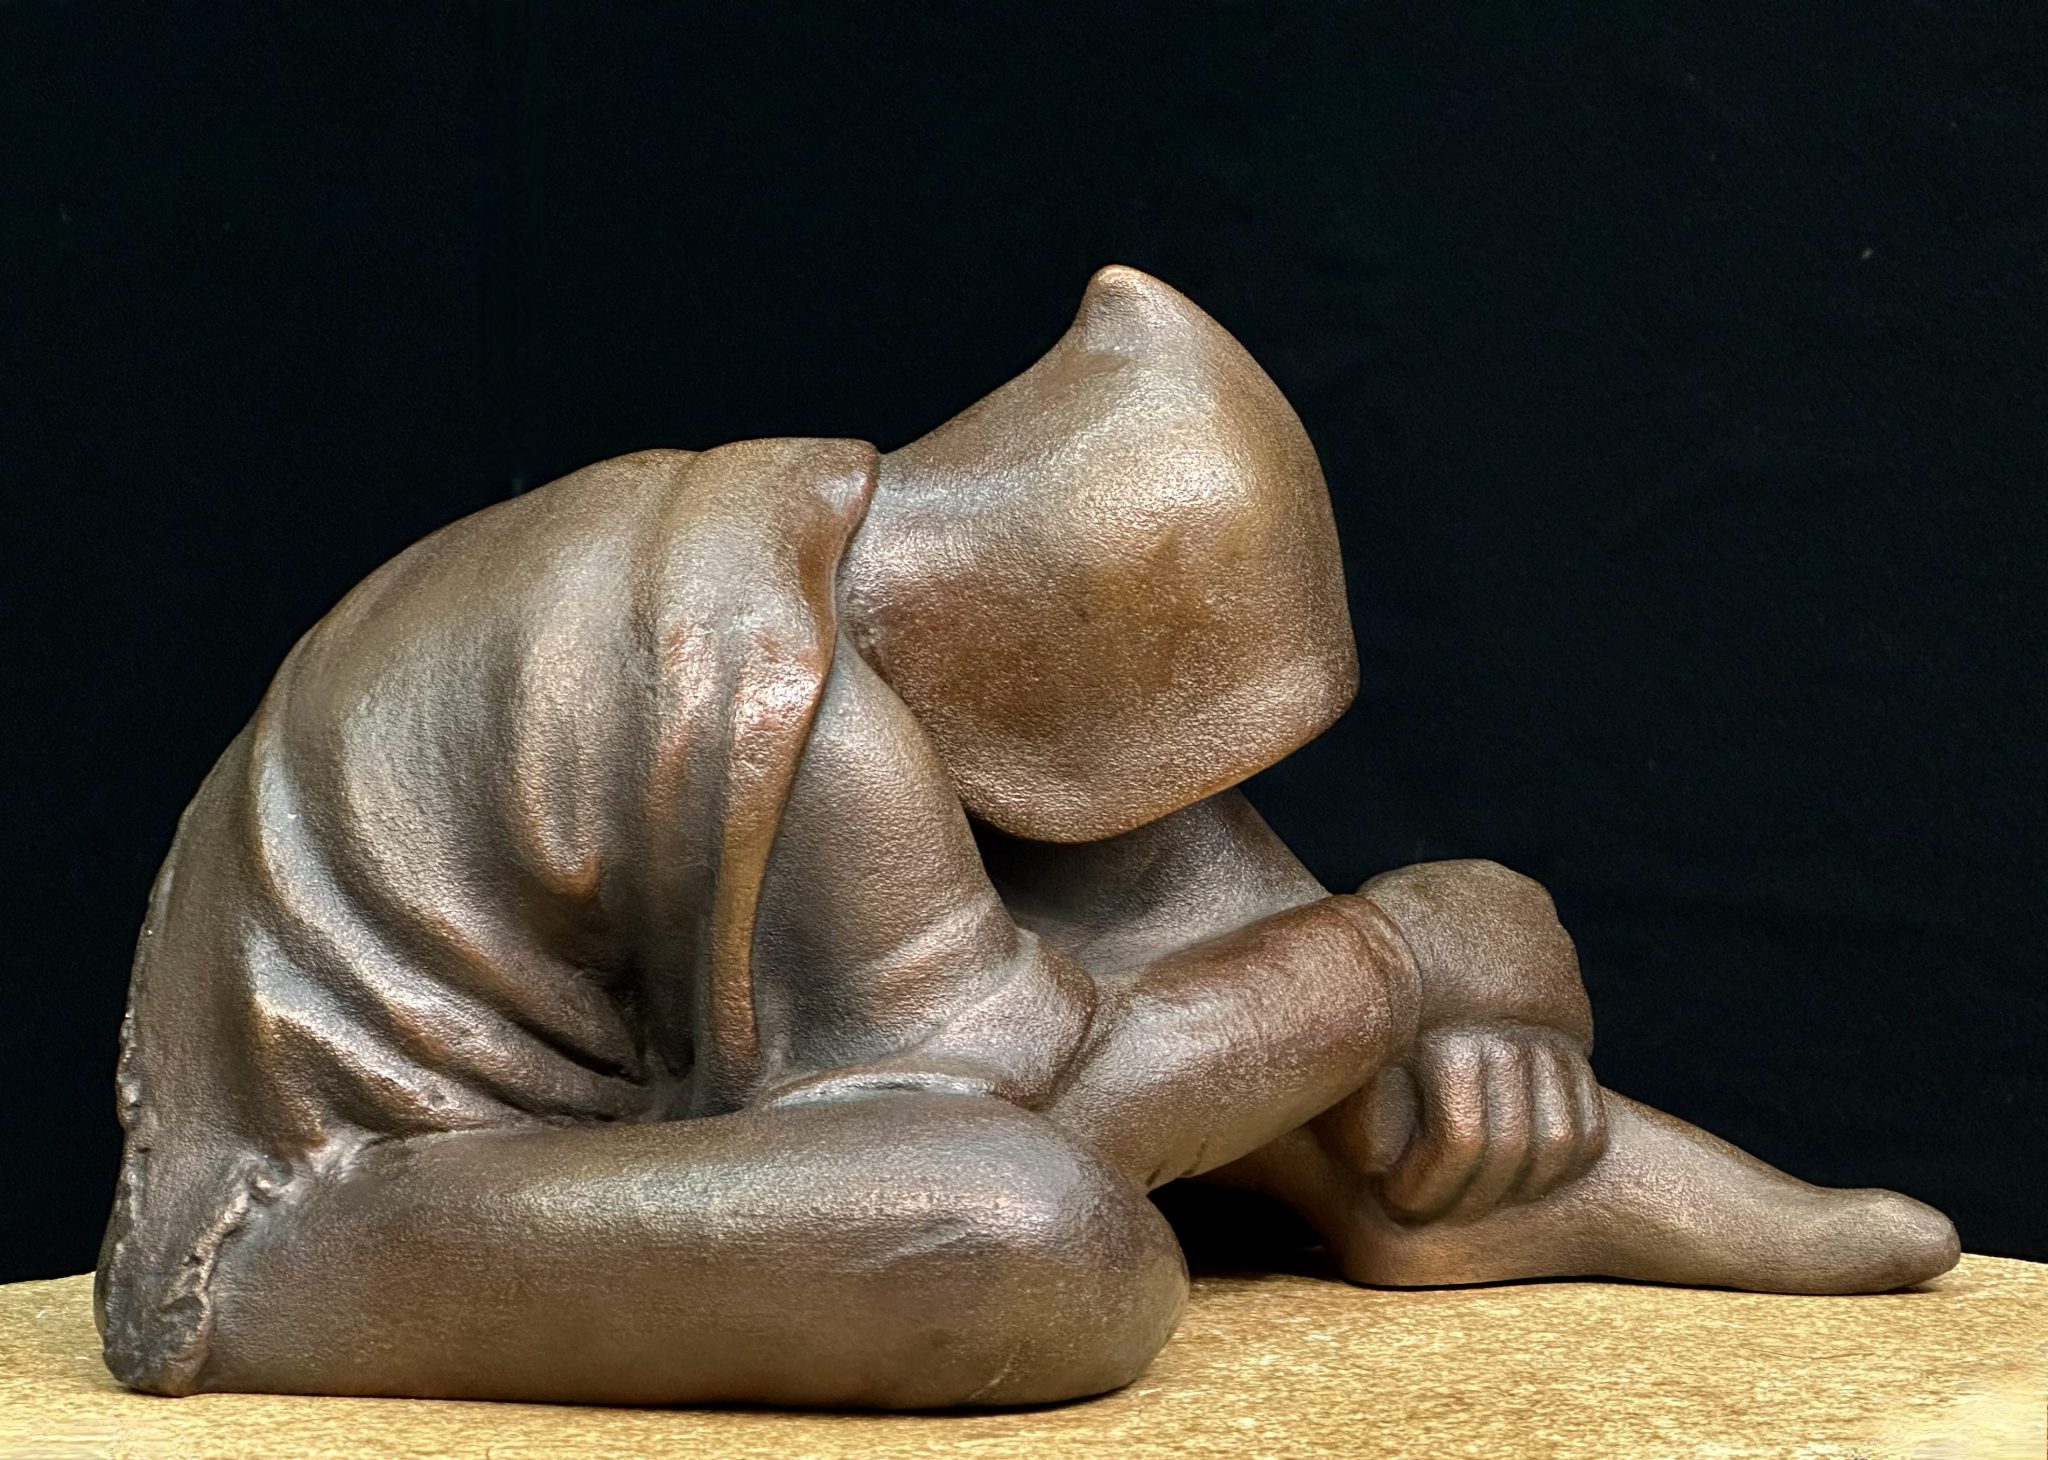 A bronze sculpture of an anonymous figure huddling forward, the right leg bent and externally rotated, the left leg bent with knee upright with both arms wrapped about it. The figure is draped with what appears to be wearing a hooded sweatshirt and is draped with a ragged blanket.